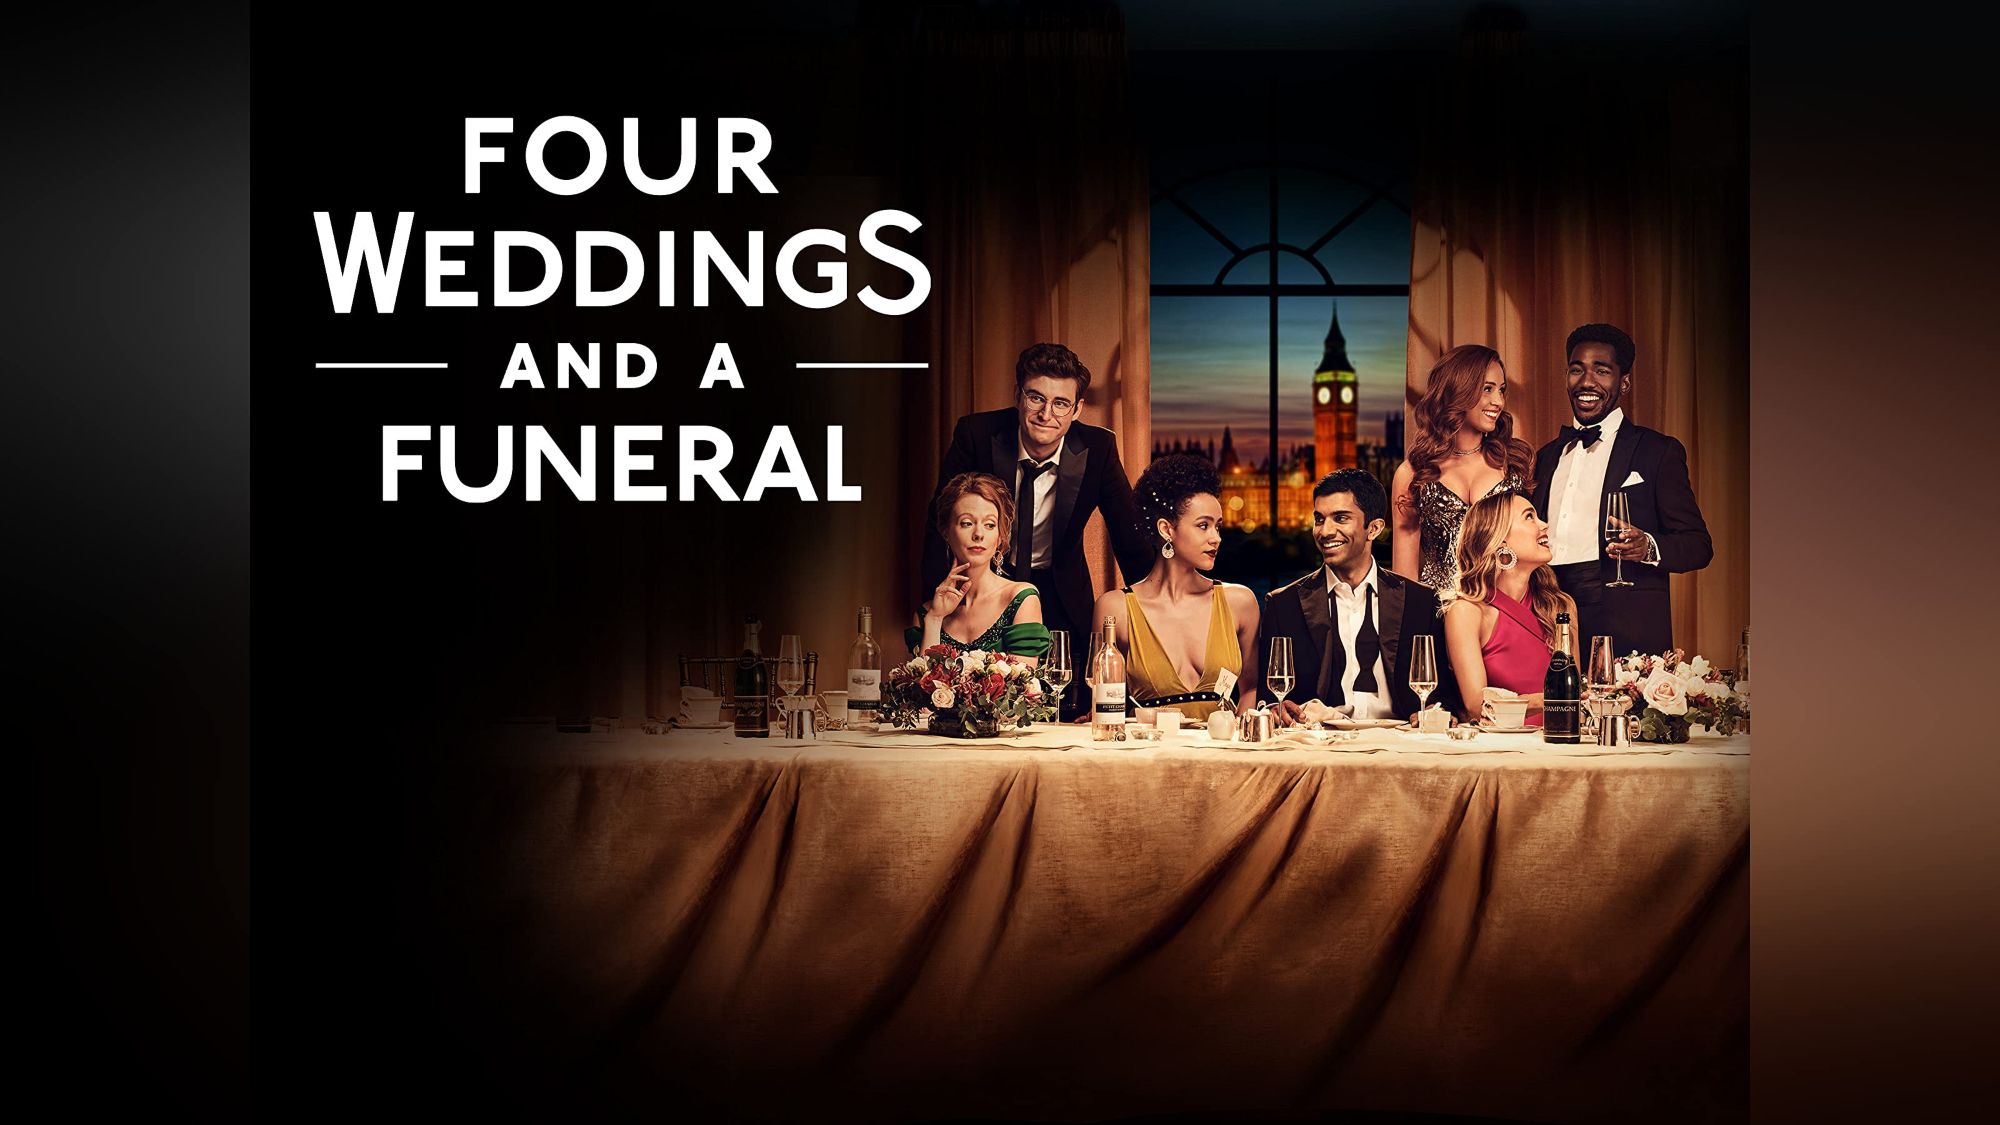 42-facts-about-the-movie-four-weddings-and-a-funeral